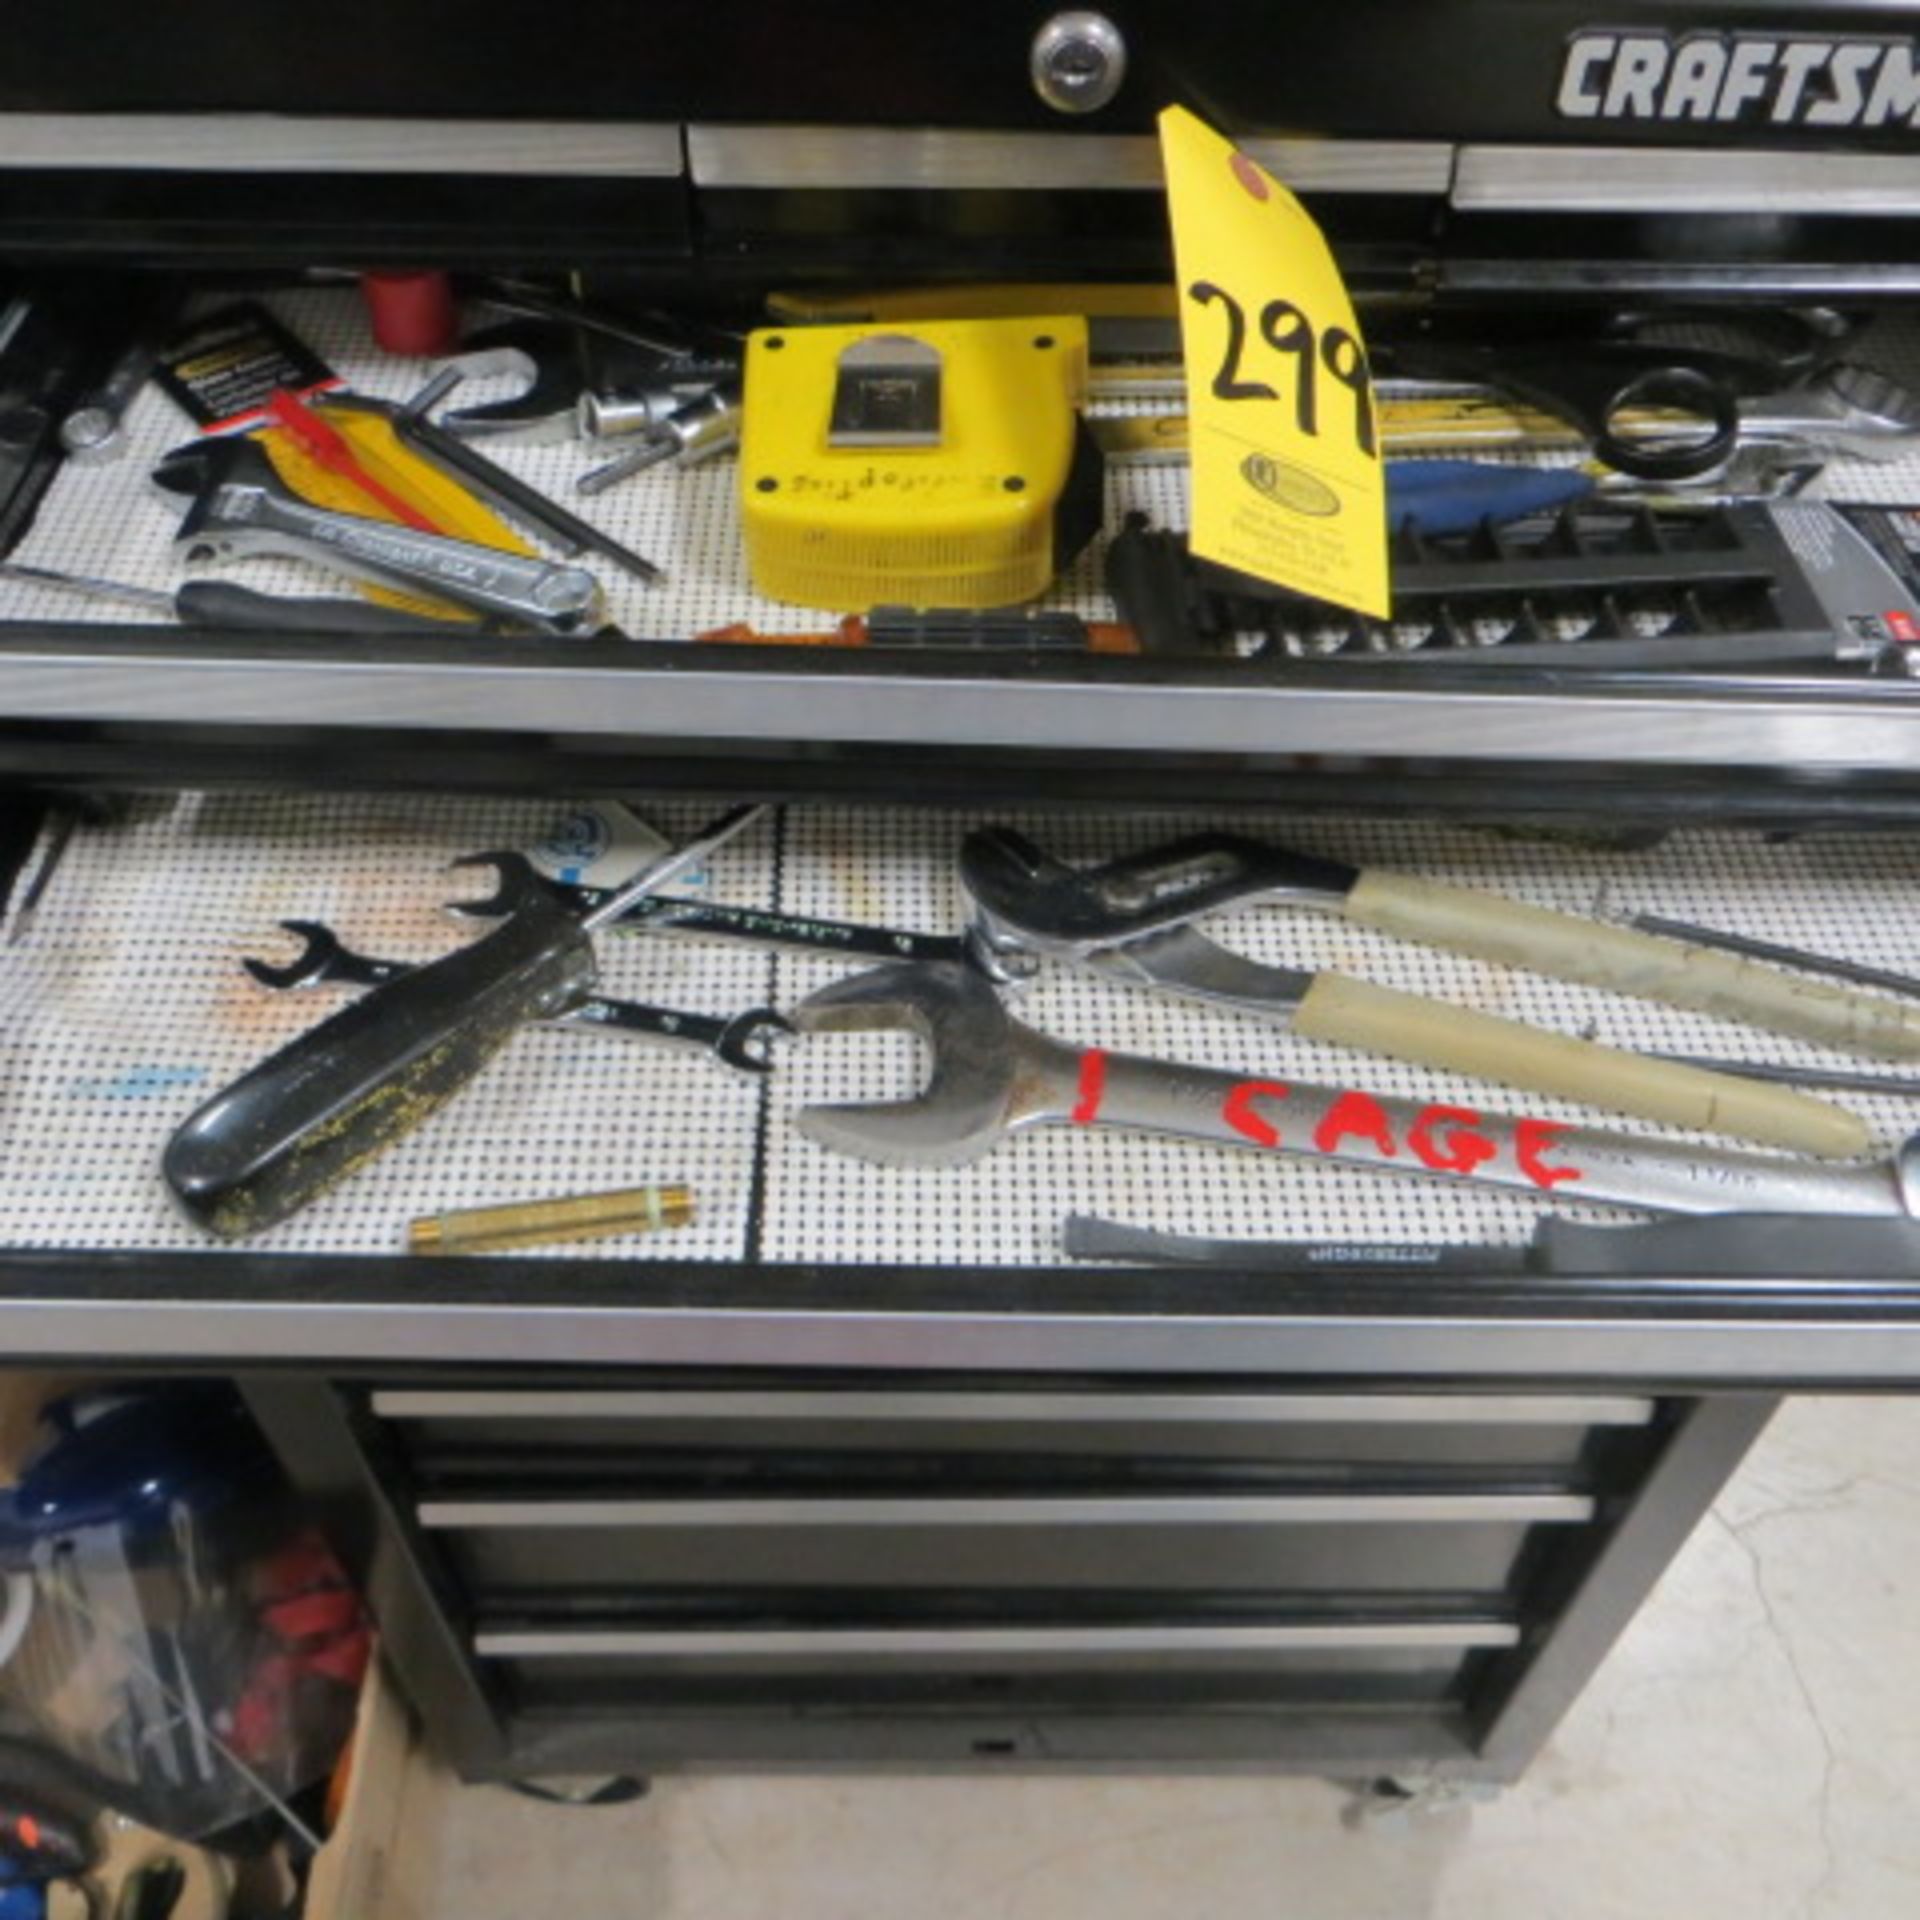 CRAFTSMAN TOOL BOX AND CONTENTS - Image 4 of 7